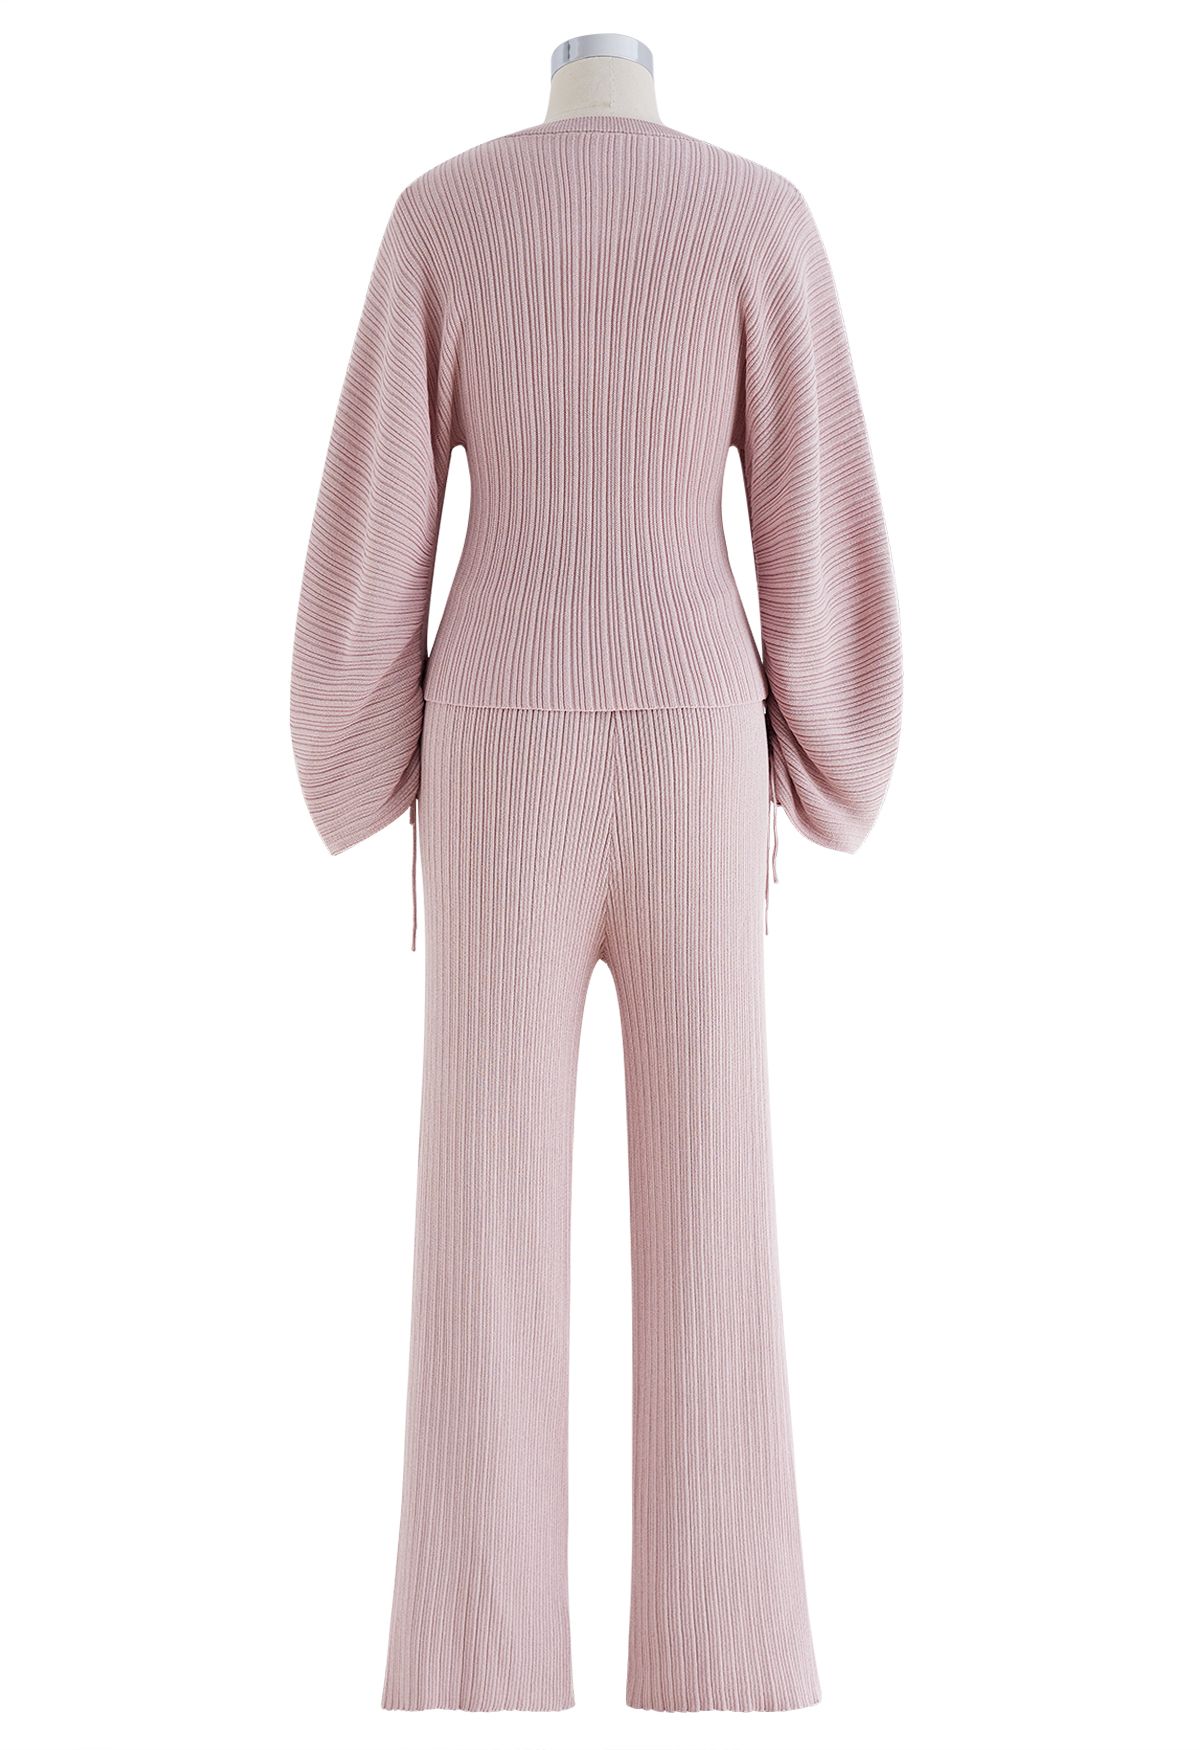 Drawstring Sleeve Knit Top and Pants Set in Dusty Pink